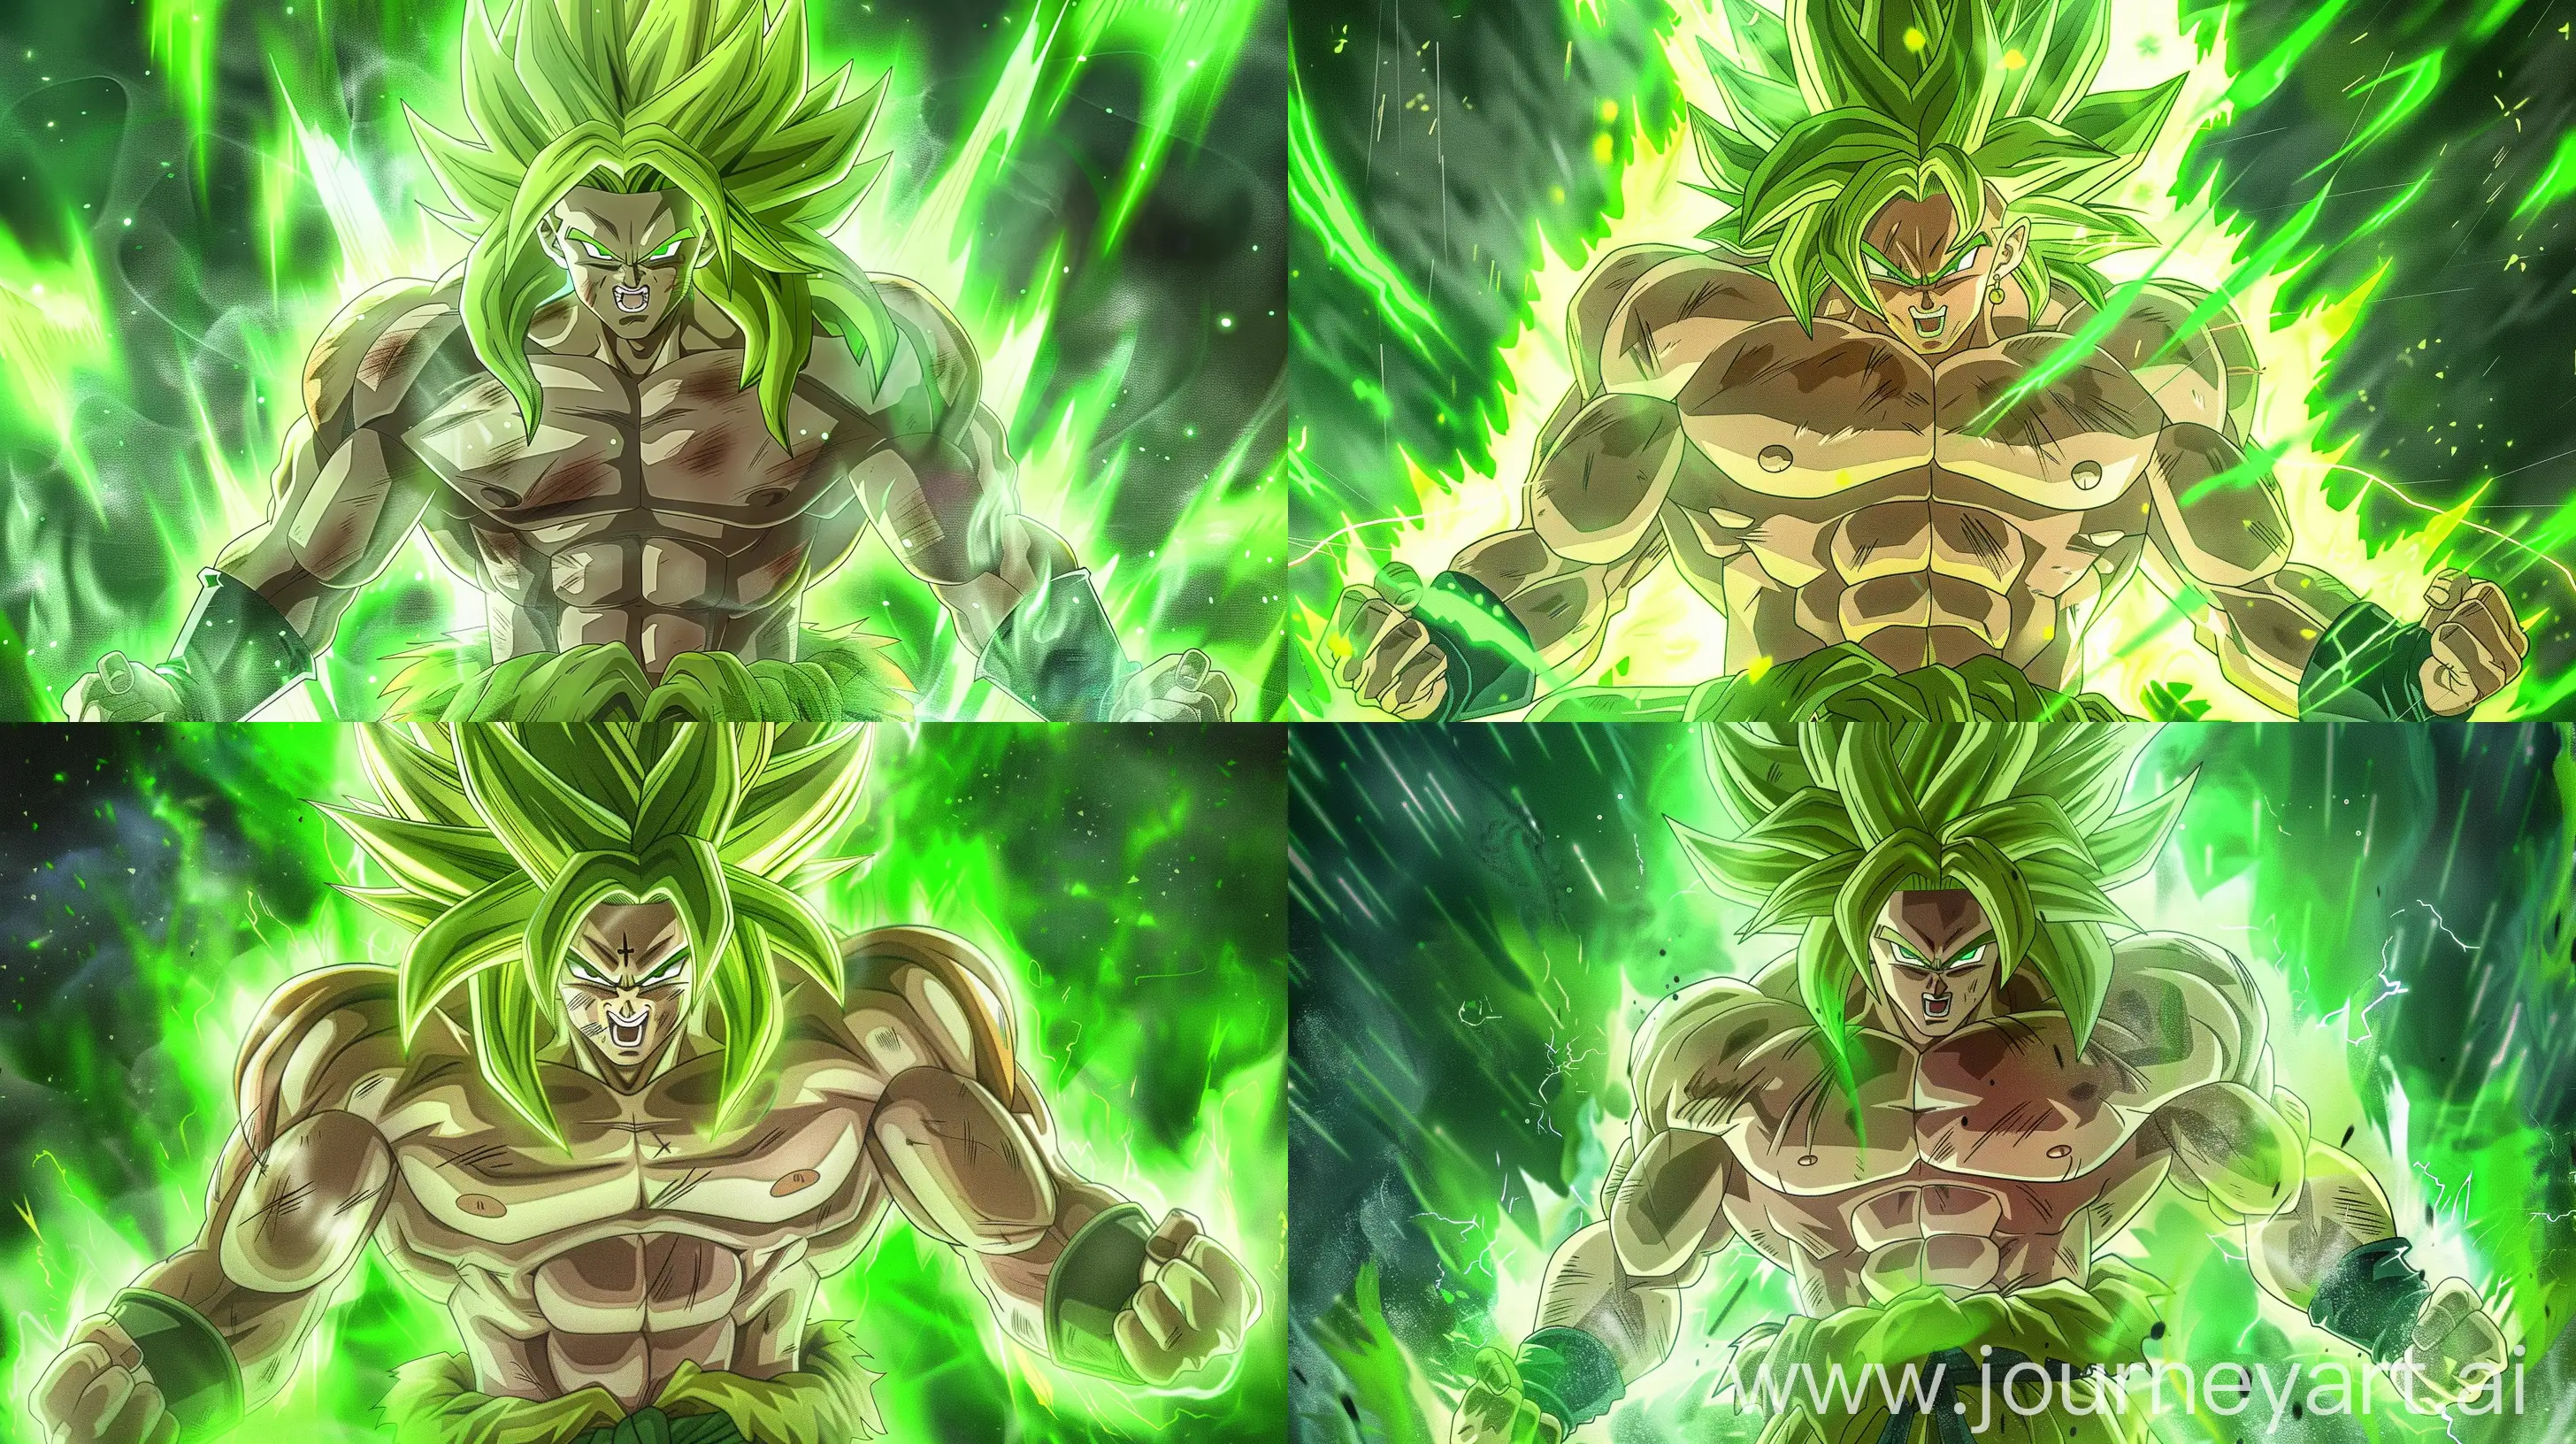 https://i.ytimg.com/vi/OGCQ6DaDoDs/maxresdefault.jpg Broly super Saiyan from Dragon Ball Super, action scene, very large muscles, green hair, the best quality, perfect details, 8K,solo,looking at viewer, green light and yellow image quality, hyper realistic painting, action scene, cinematic, magical glowing aura. --ar 16:9